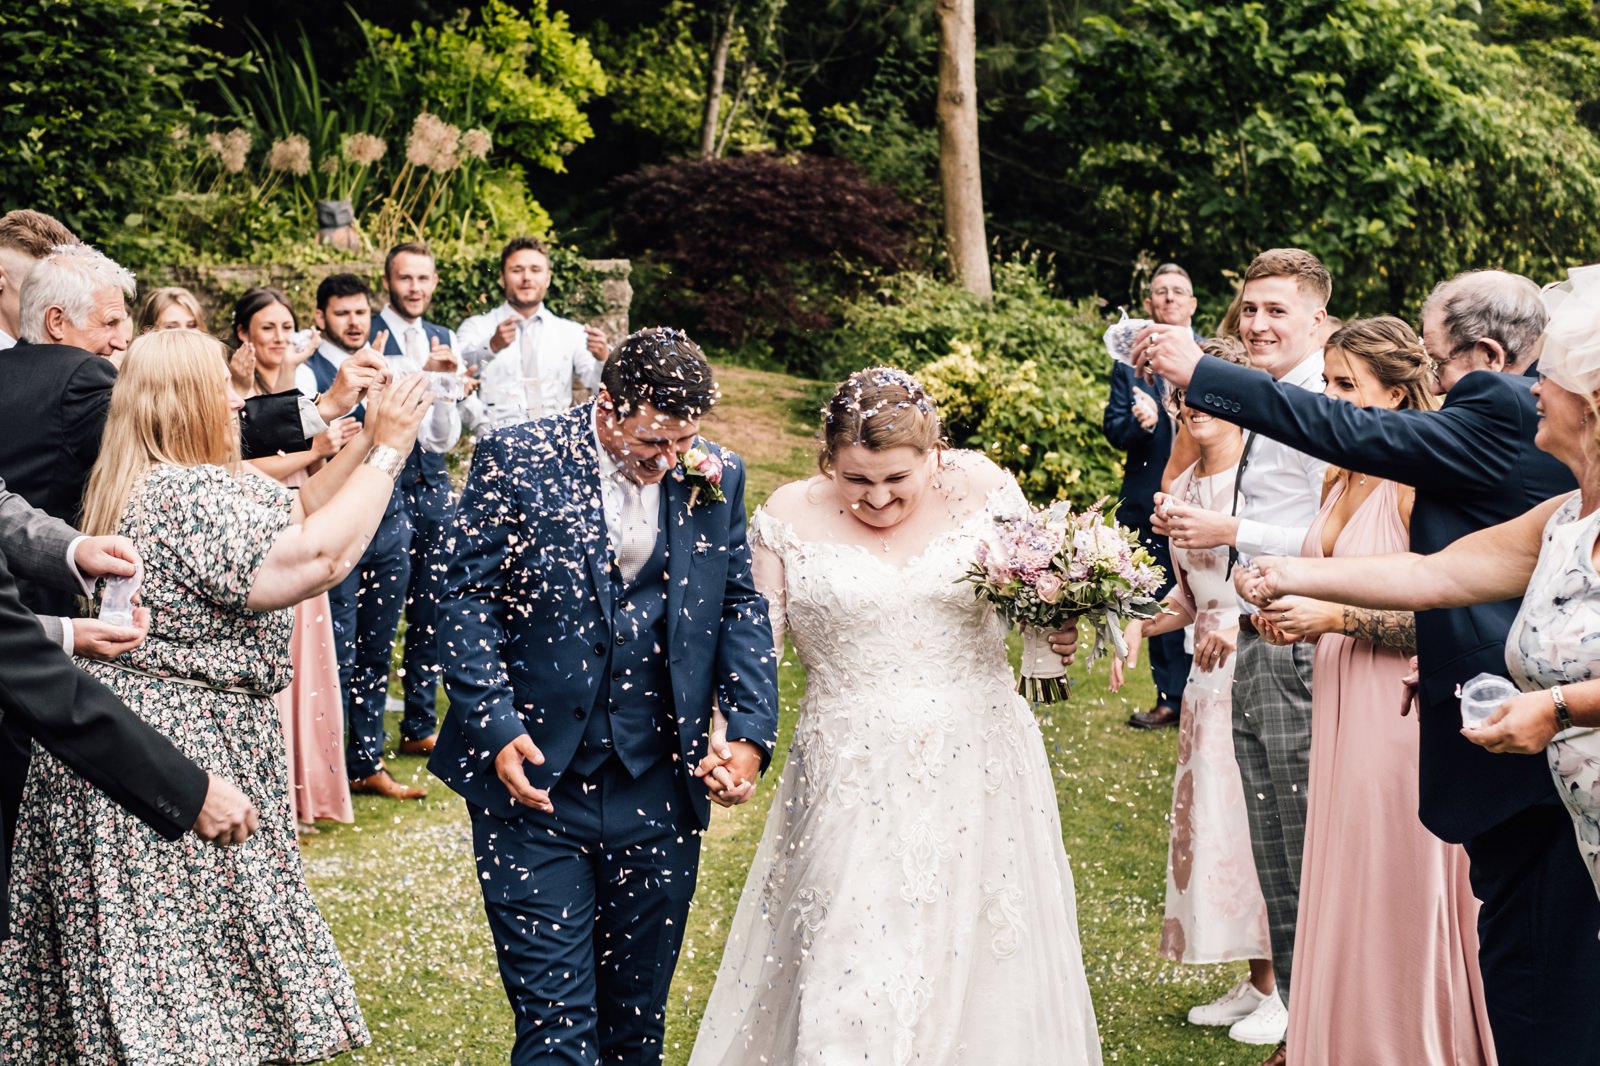 Confetti thrown at bride and groom